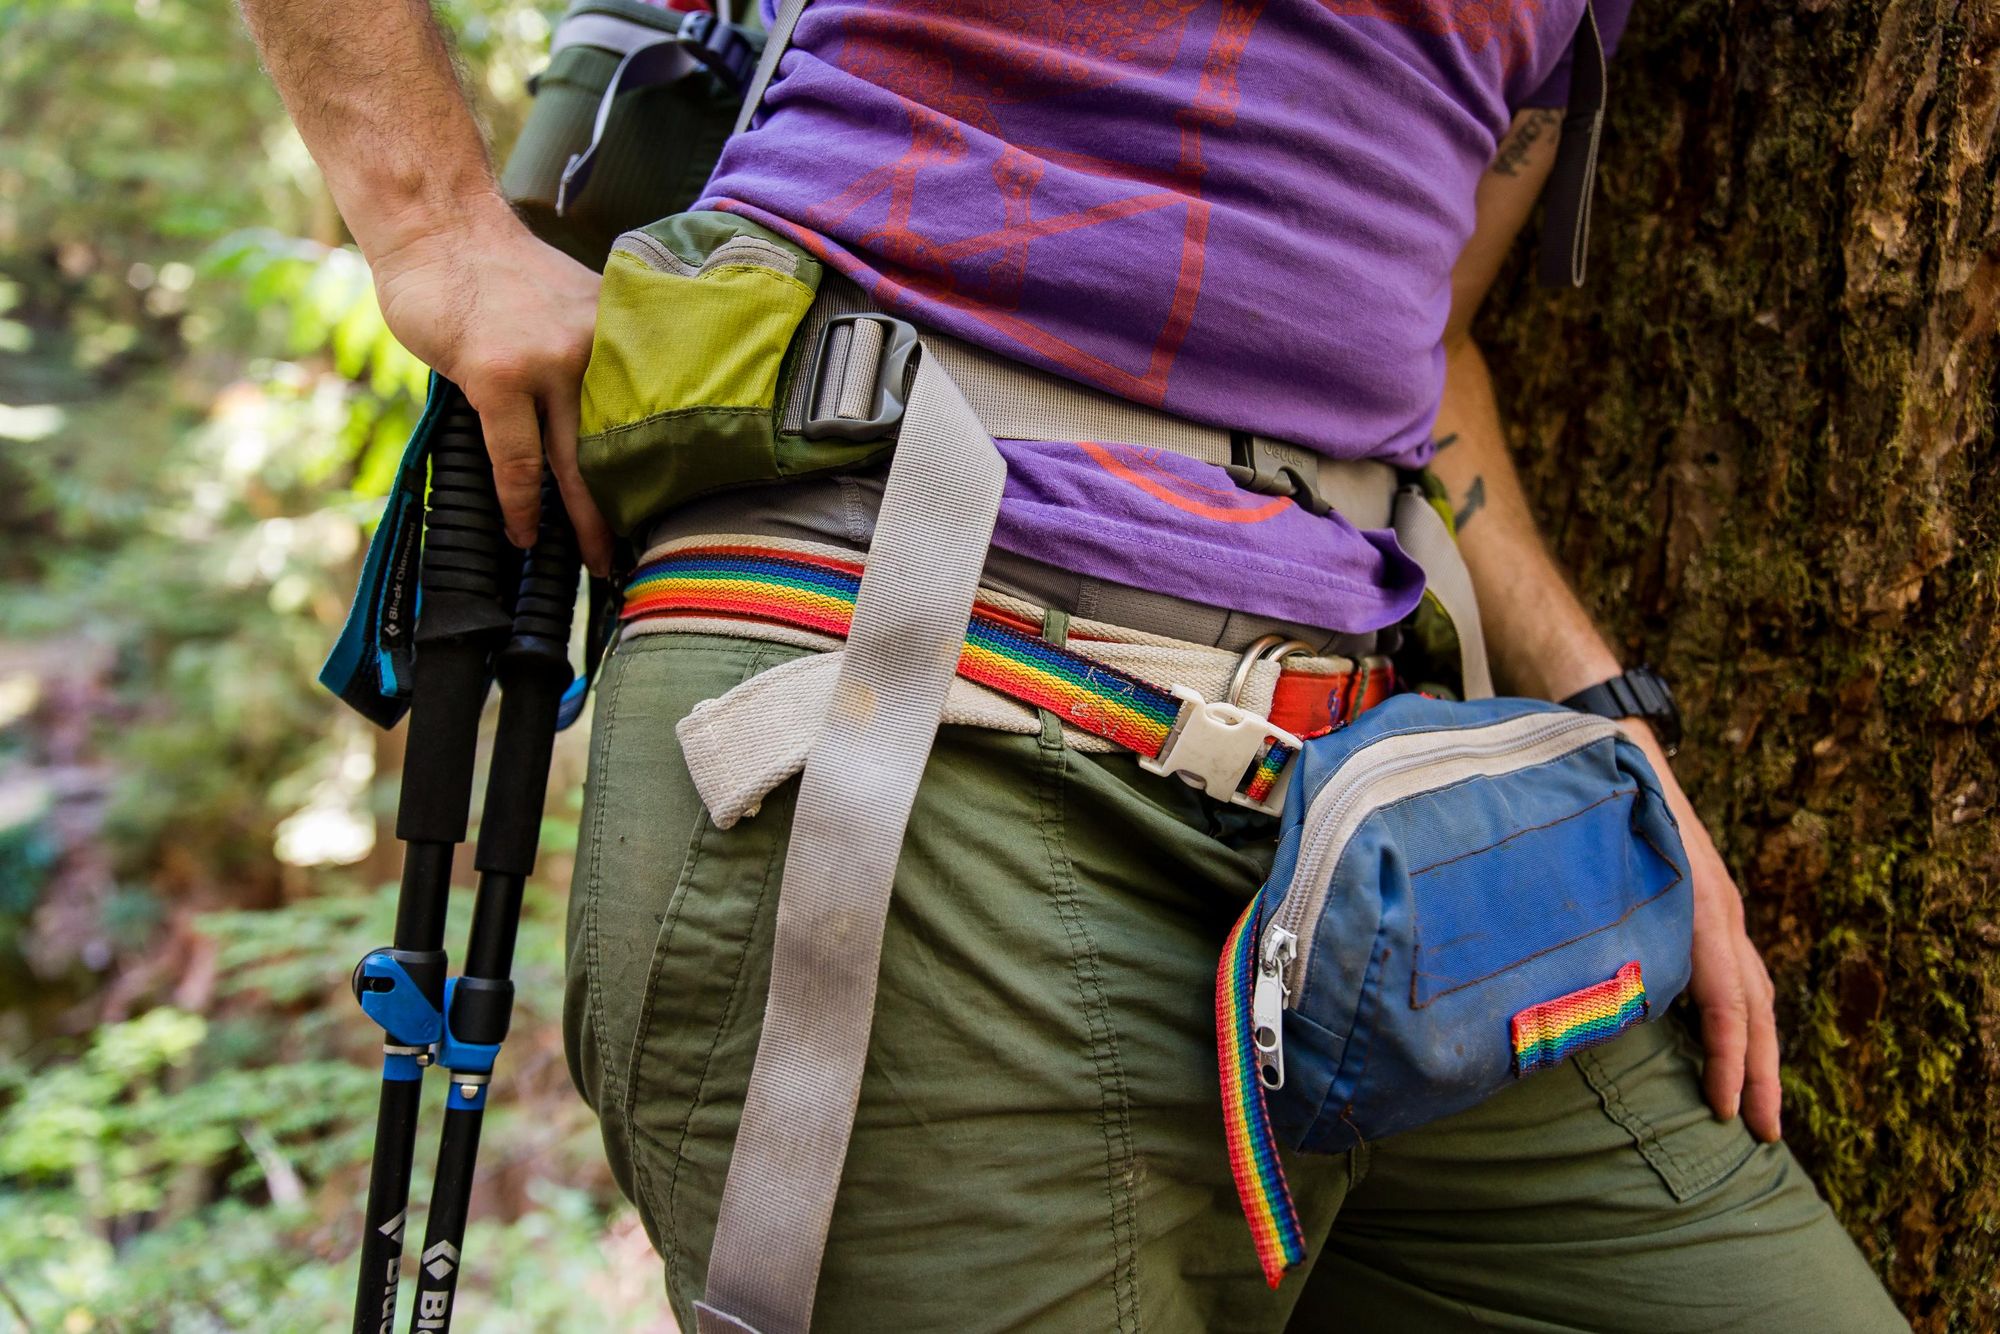 Close up of a queer hiker with pride bag. Photo: Leah Nash/The Venture Out Project.